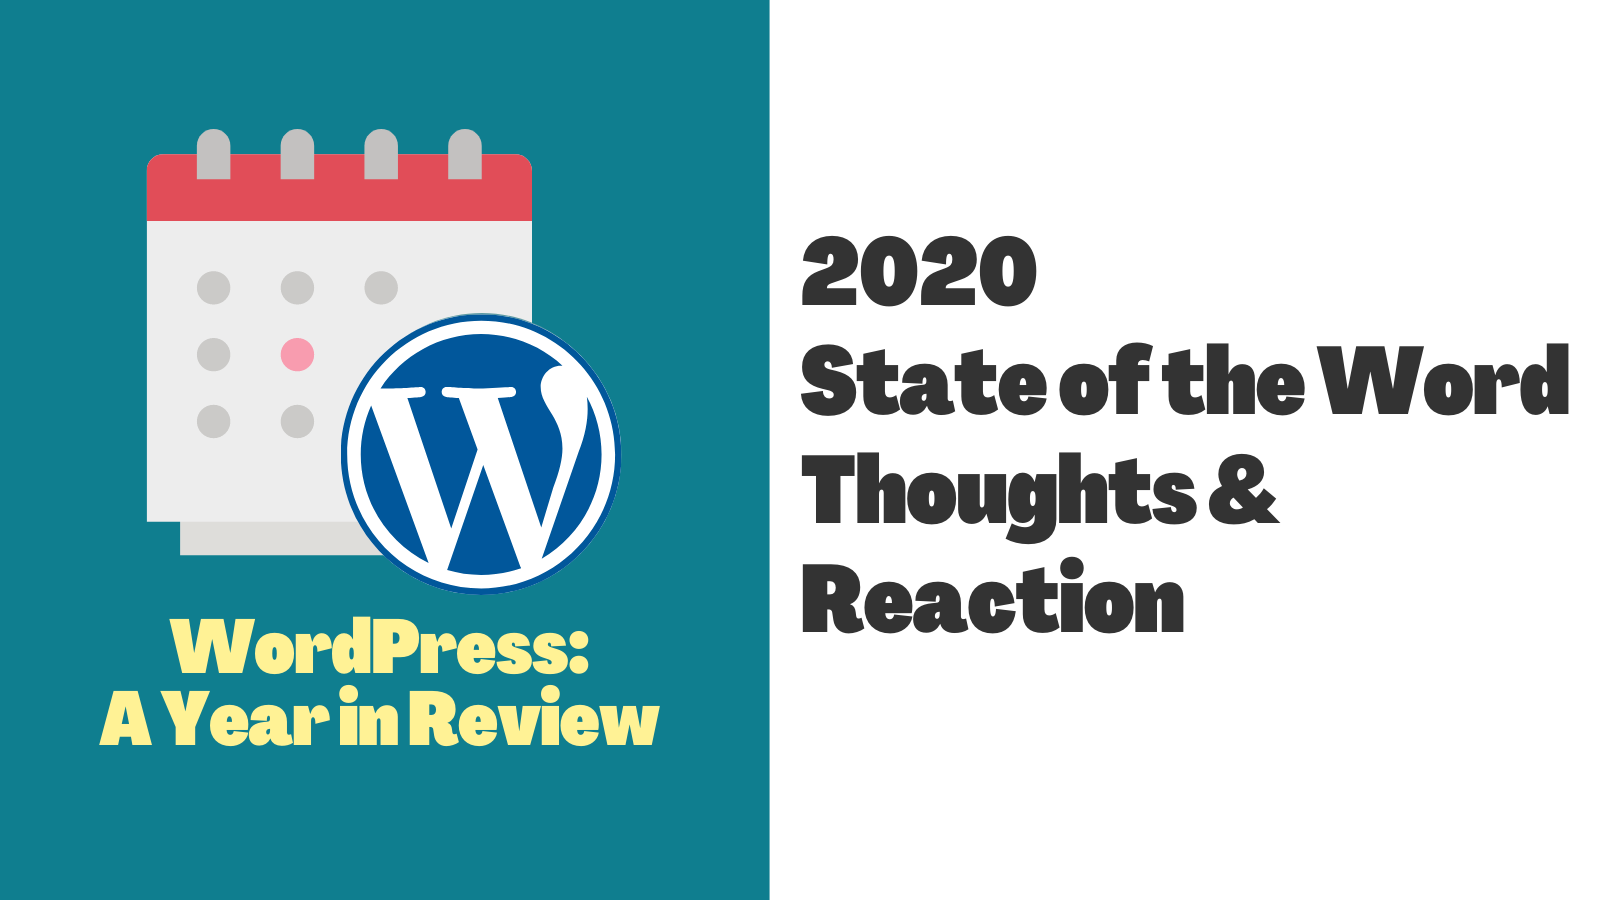 2020 State of the Word Thoughts